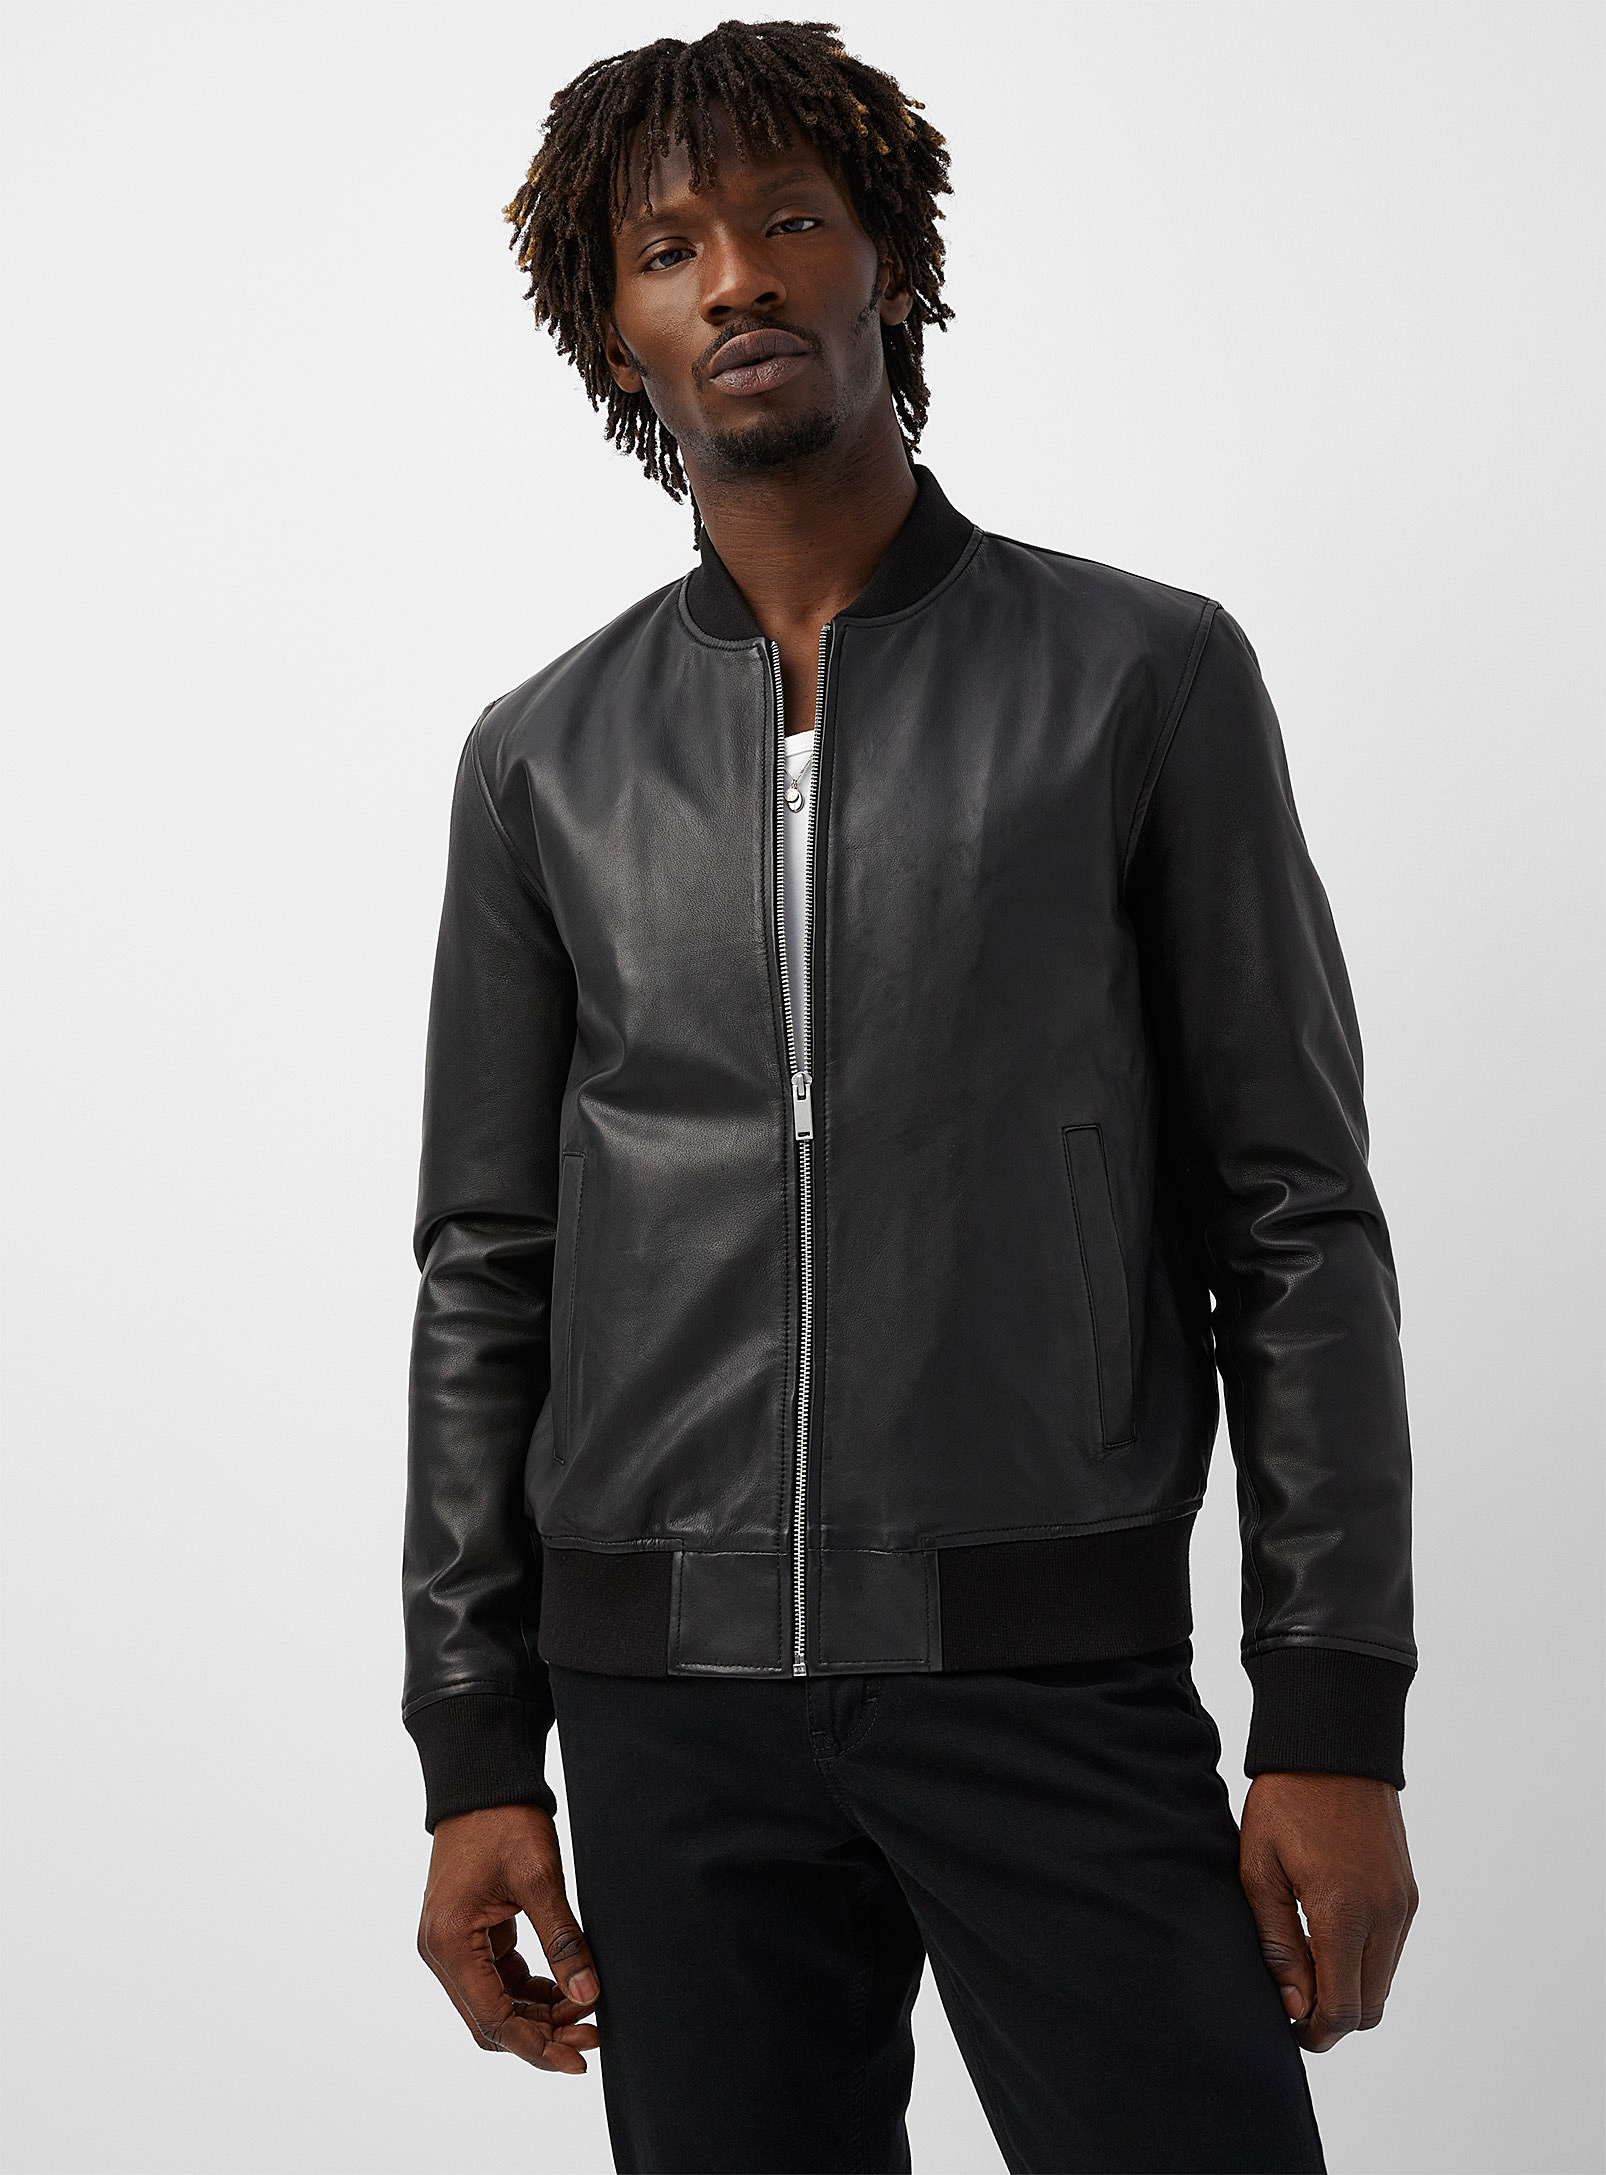 Sly & Co - Men's Museum leather bomber jacket